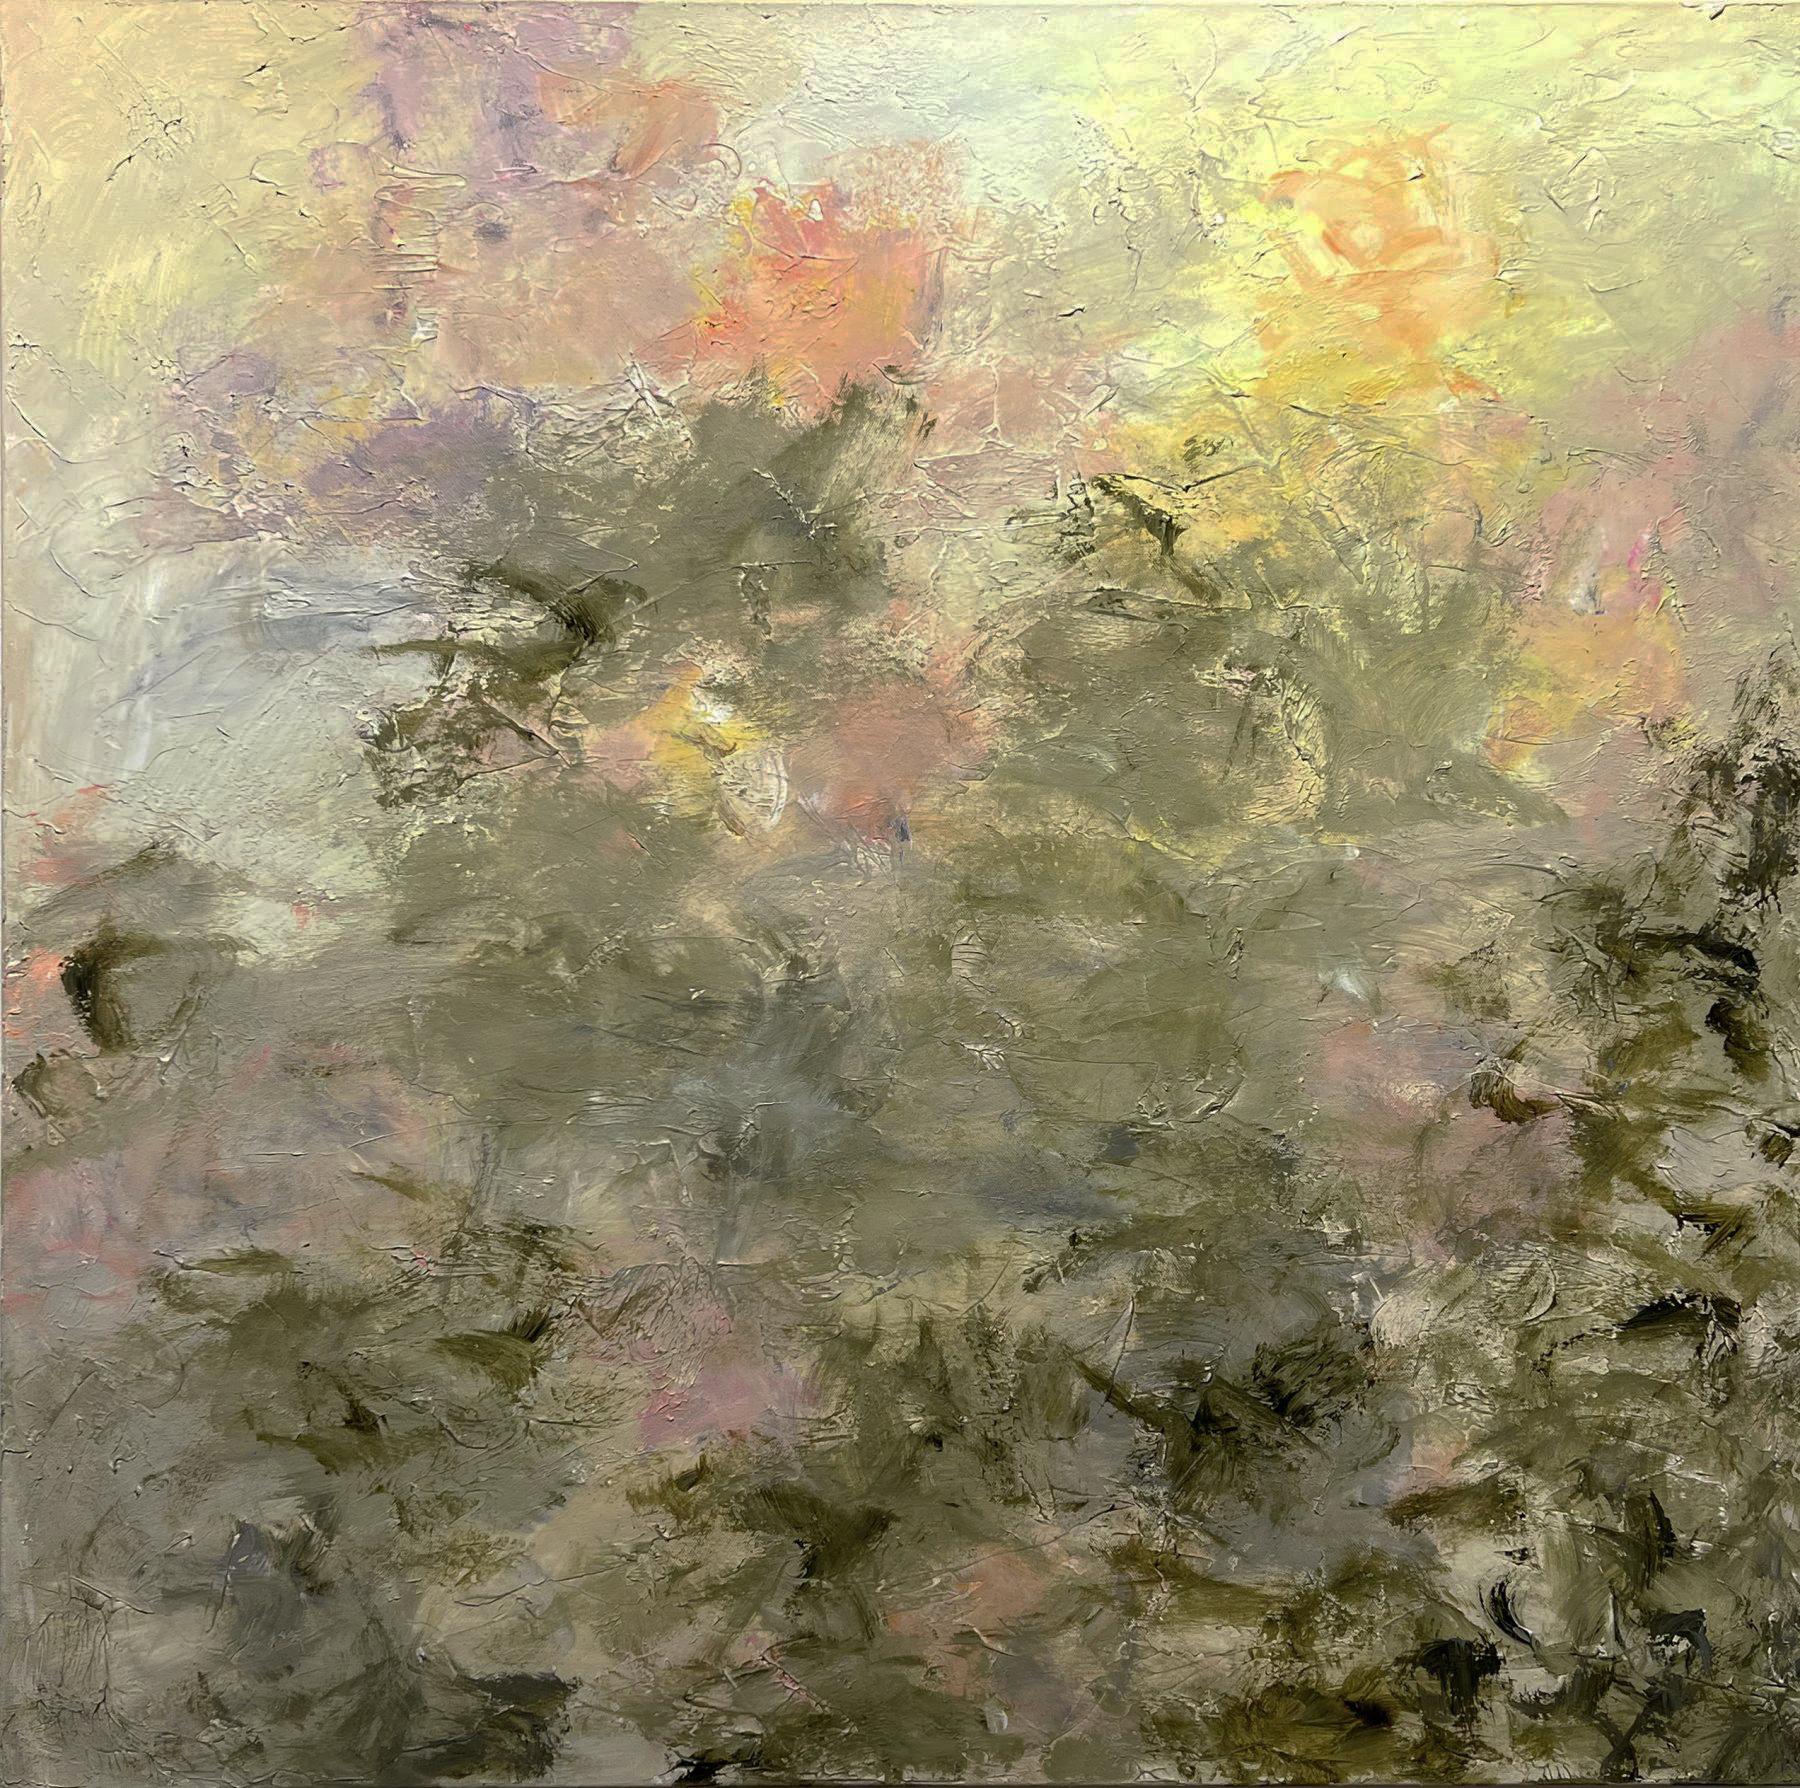 Gary Zack  Landscape Painting - Gary Zack, "Golden Blush", 36x36 Atmospheric Pink Floral Oil Painting on Canvas